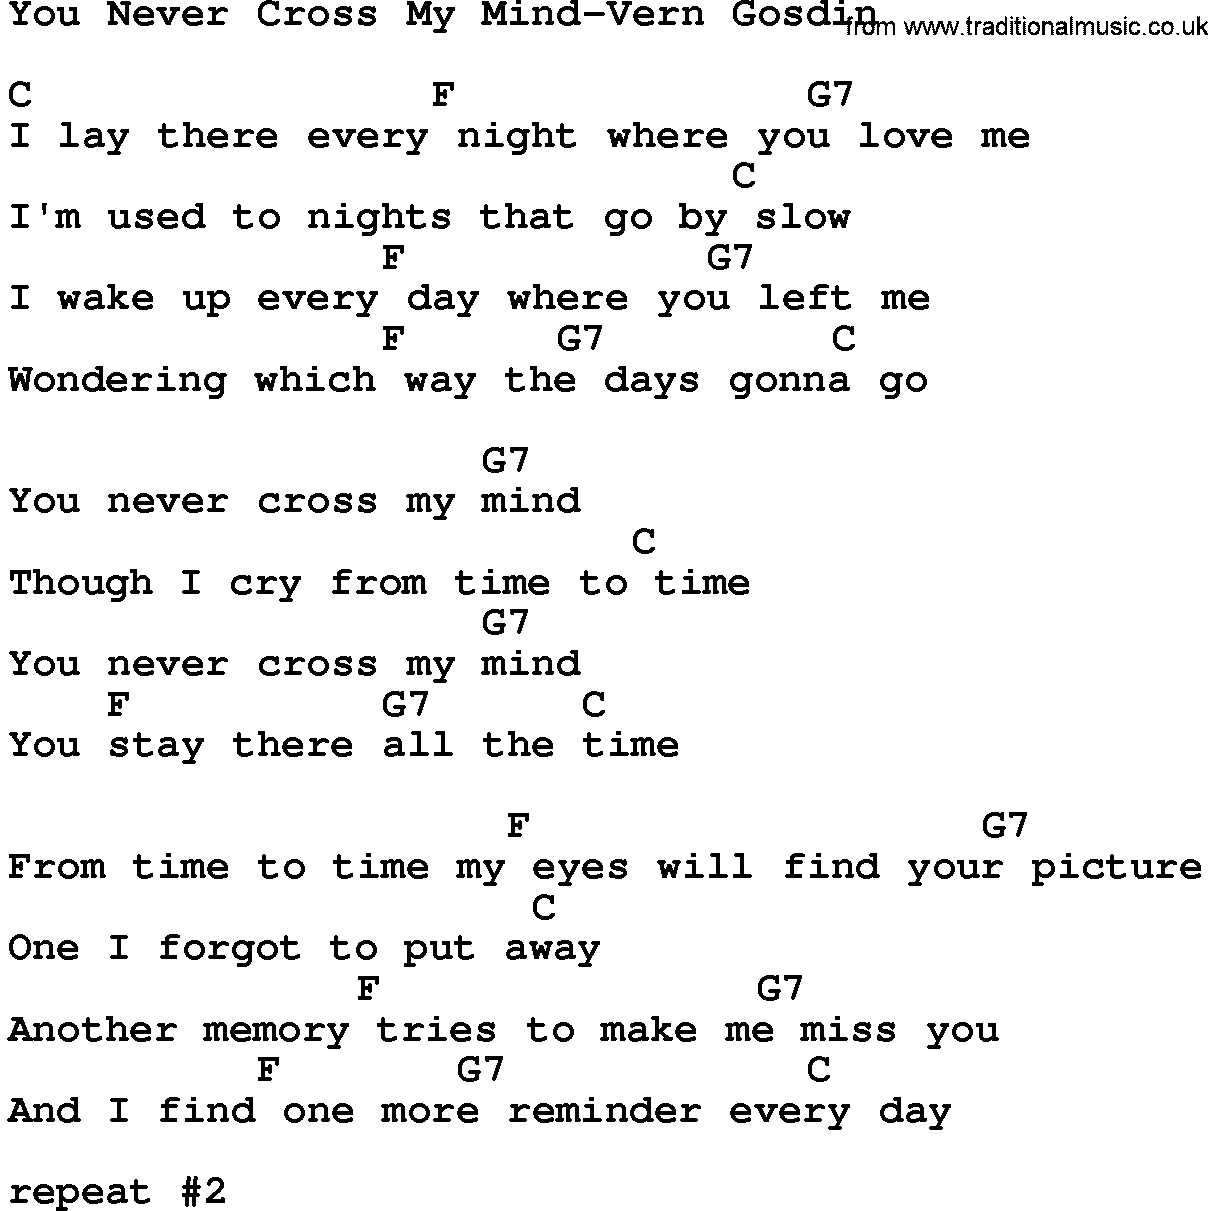 Country music song: You Never Cross My Mind-Vern Gosdin lyrics and chords